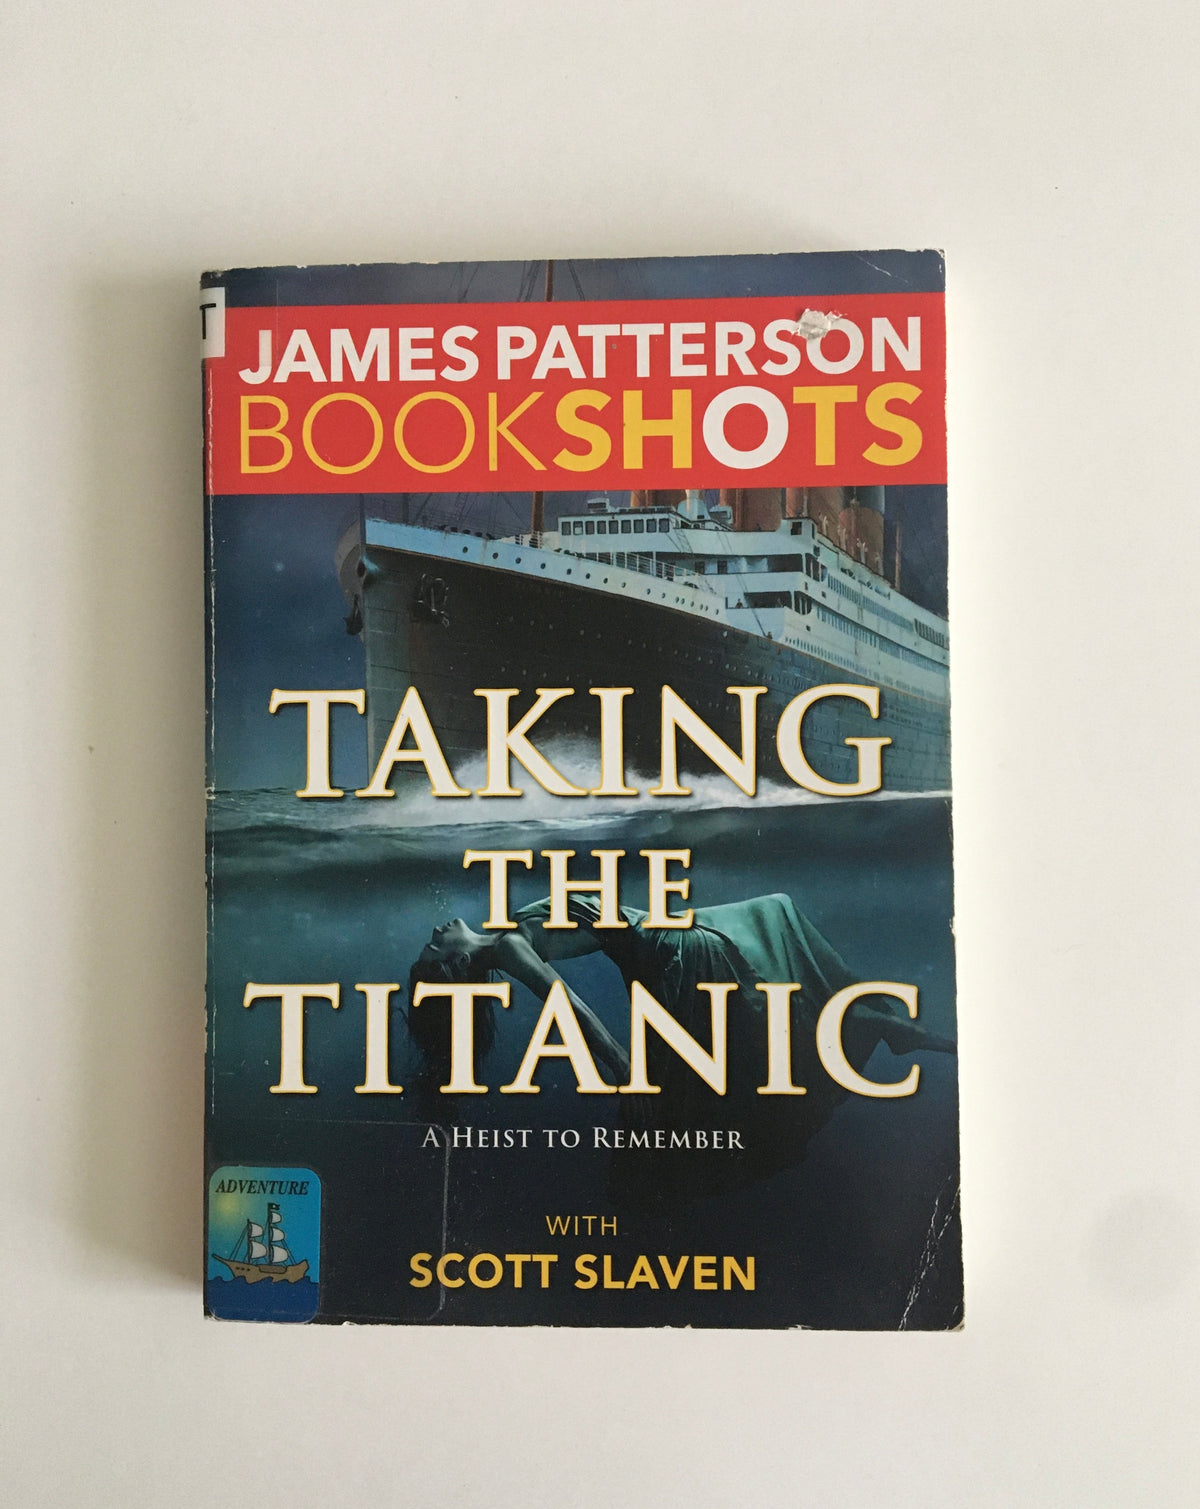 Taking the Titanic by James Patterson